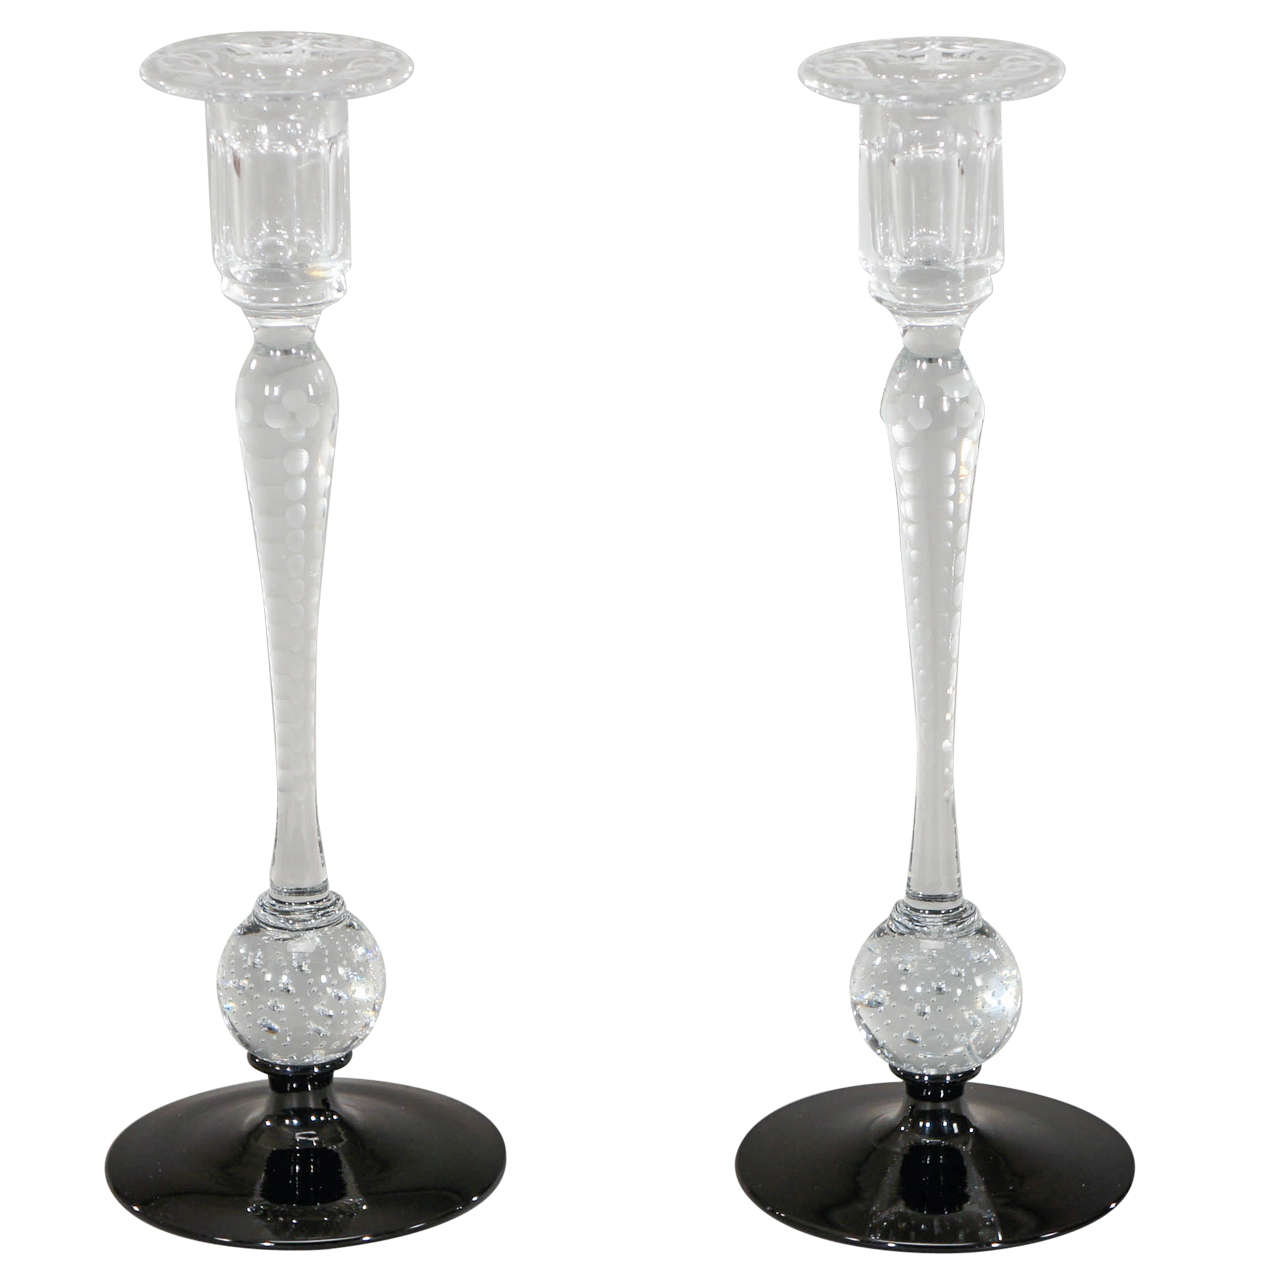 Rare Pair of Pairpoint Handblown, Wheel Cut Crystal Candlesticks with Black Base For Sale